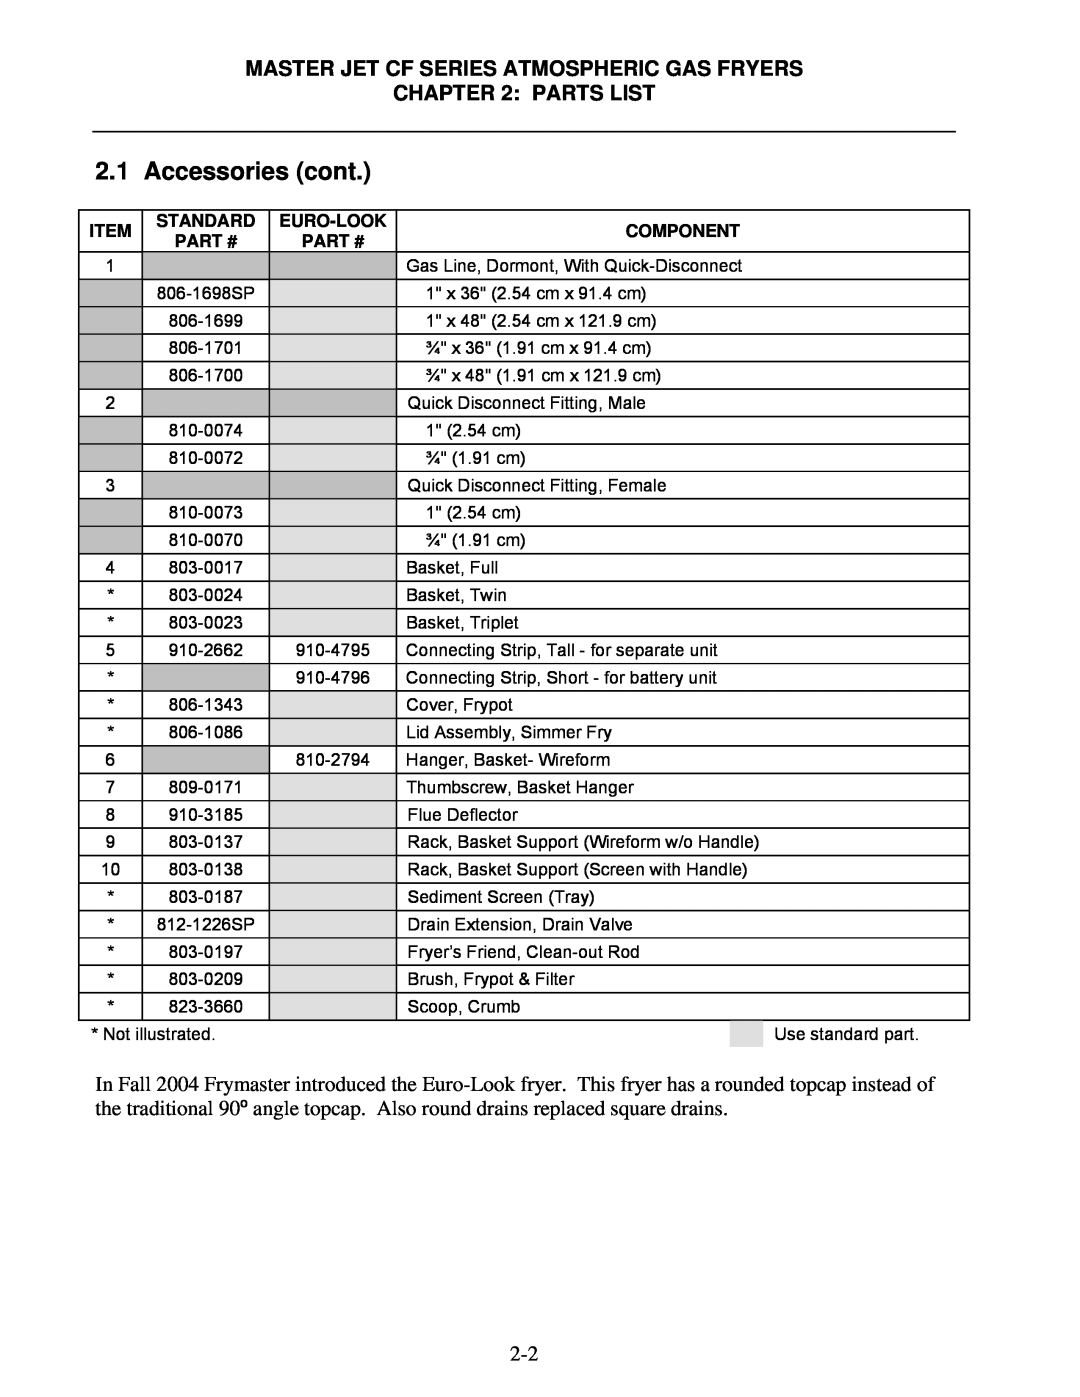 Frymaster FMCFE Accessories cont, Master Jet Cf Series Atmospheric Gas Fryers Parts List, Standard, Euro-Look, Component 